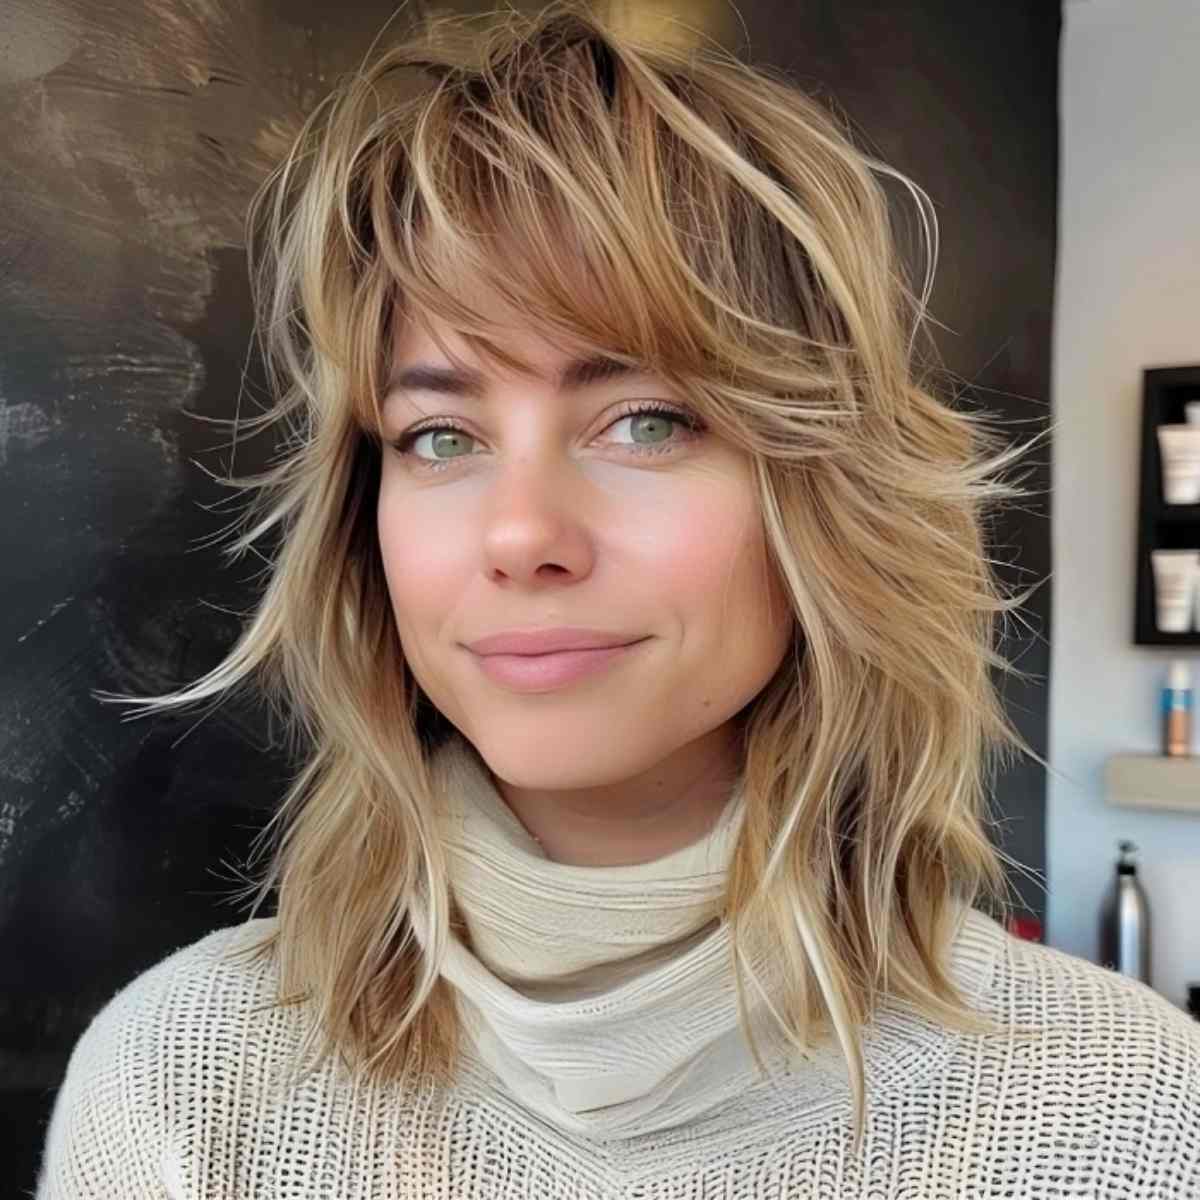 Textured Cut with Feathery Bangs for Fine Hair